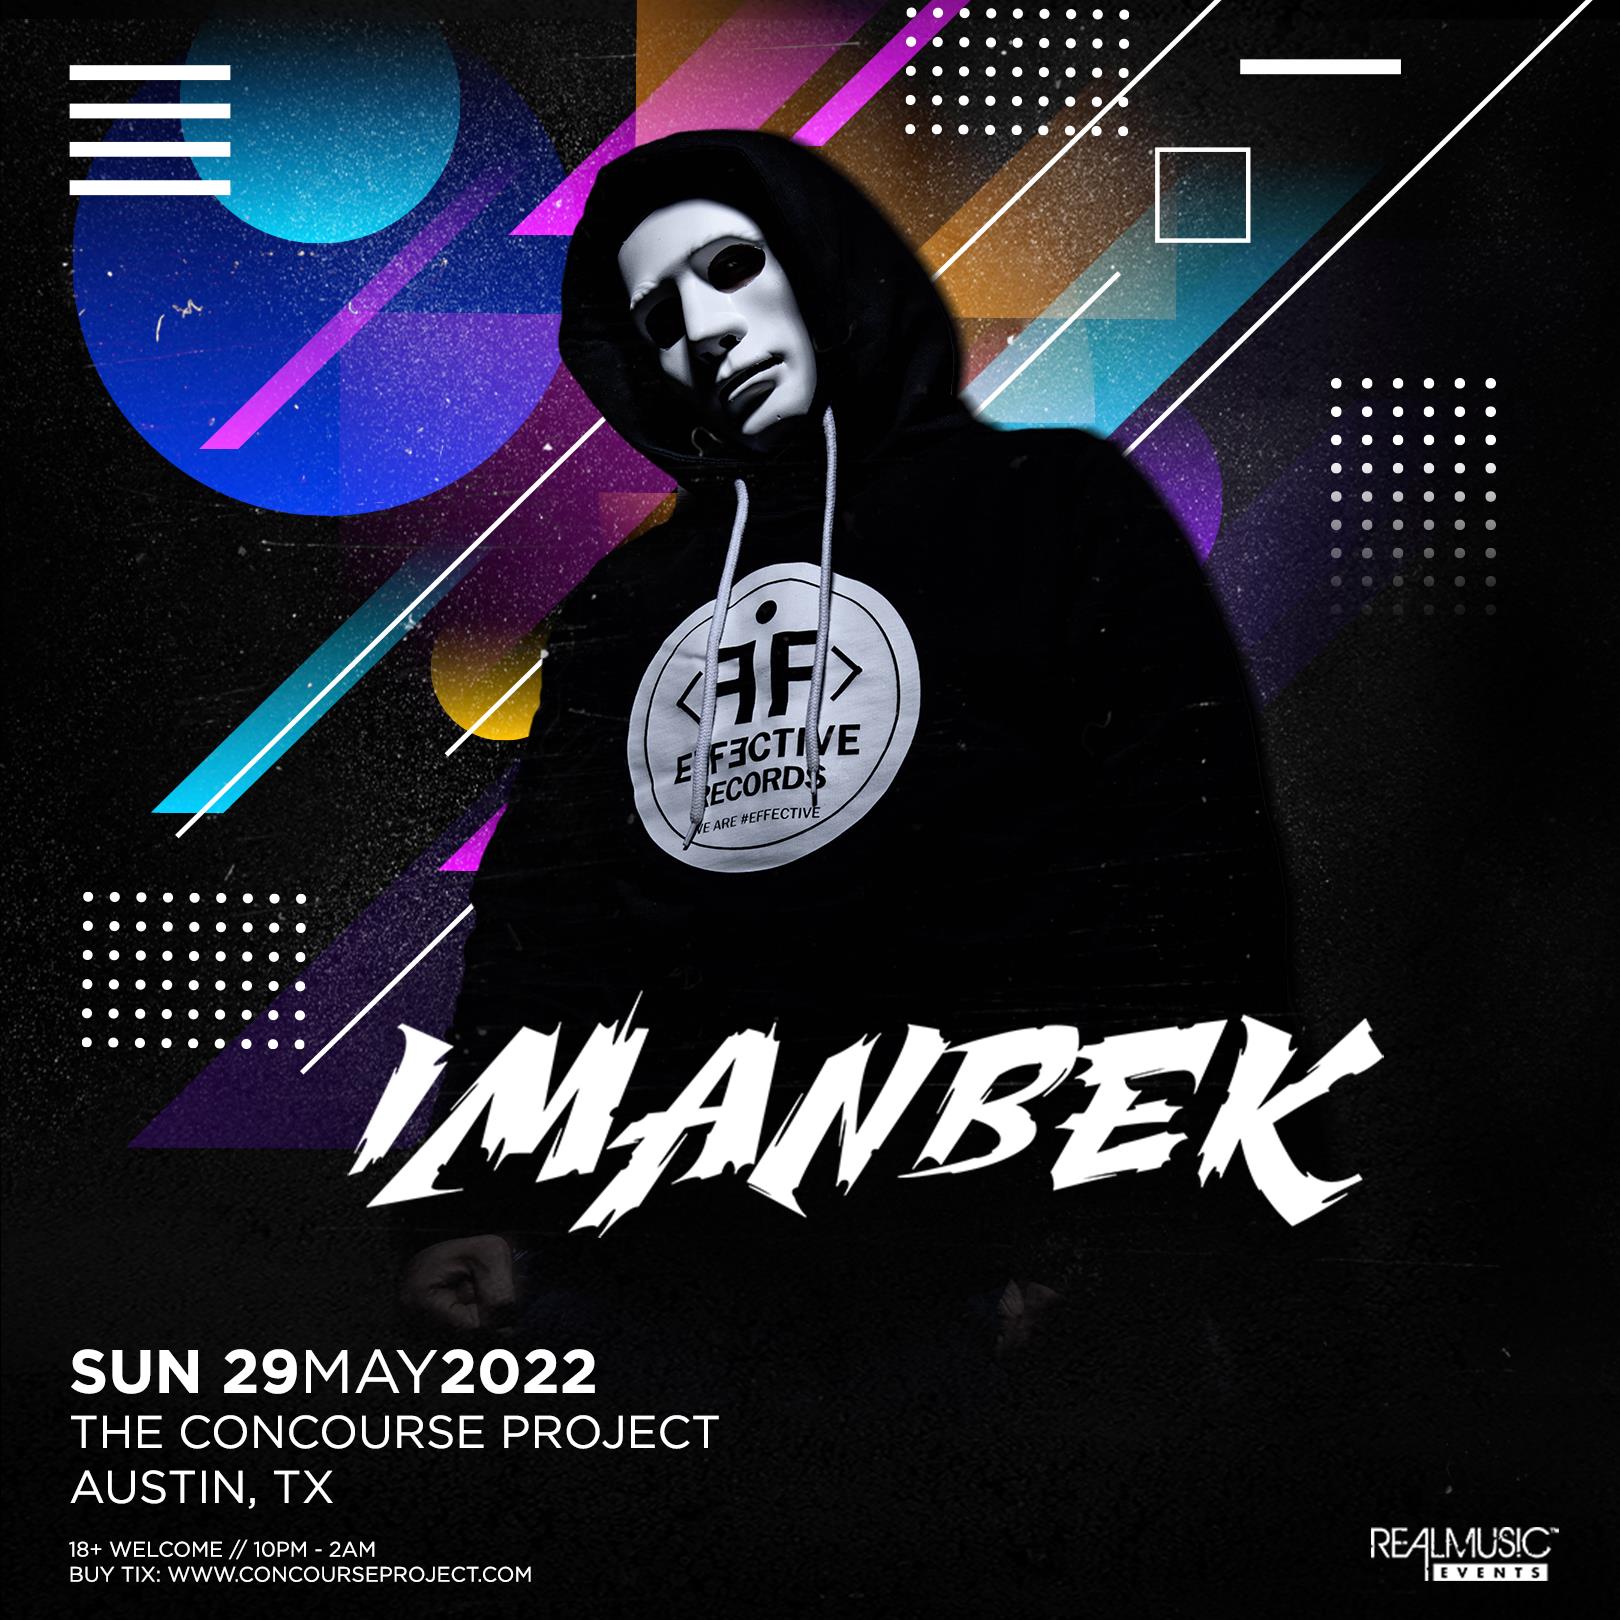 BEING RESCHEDULED: Imanbek at The Concourse Project